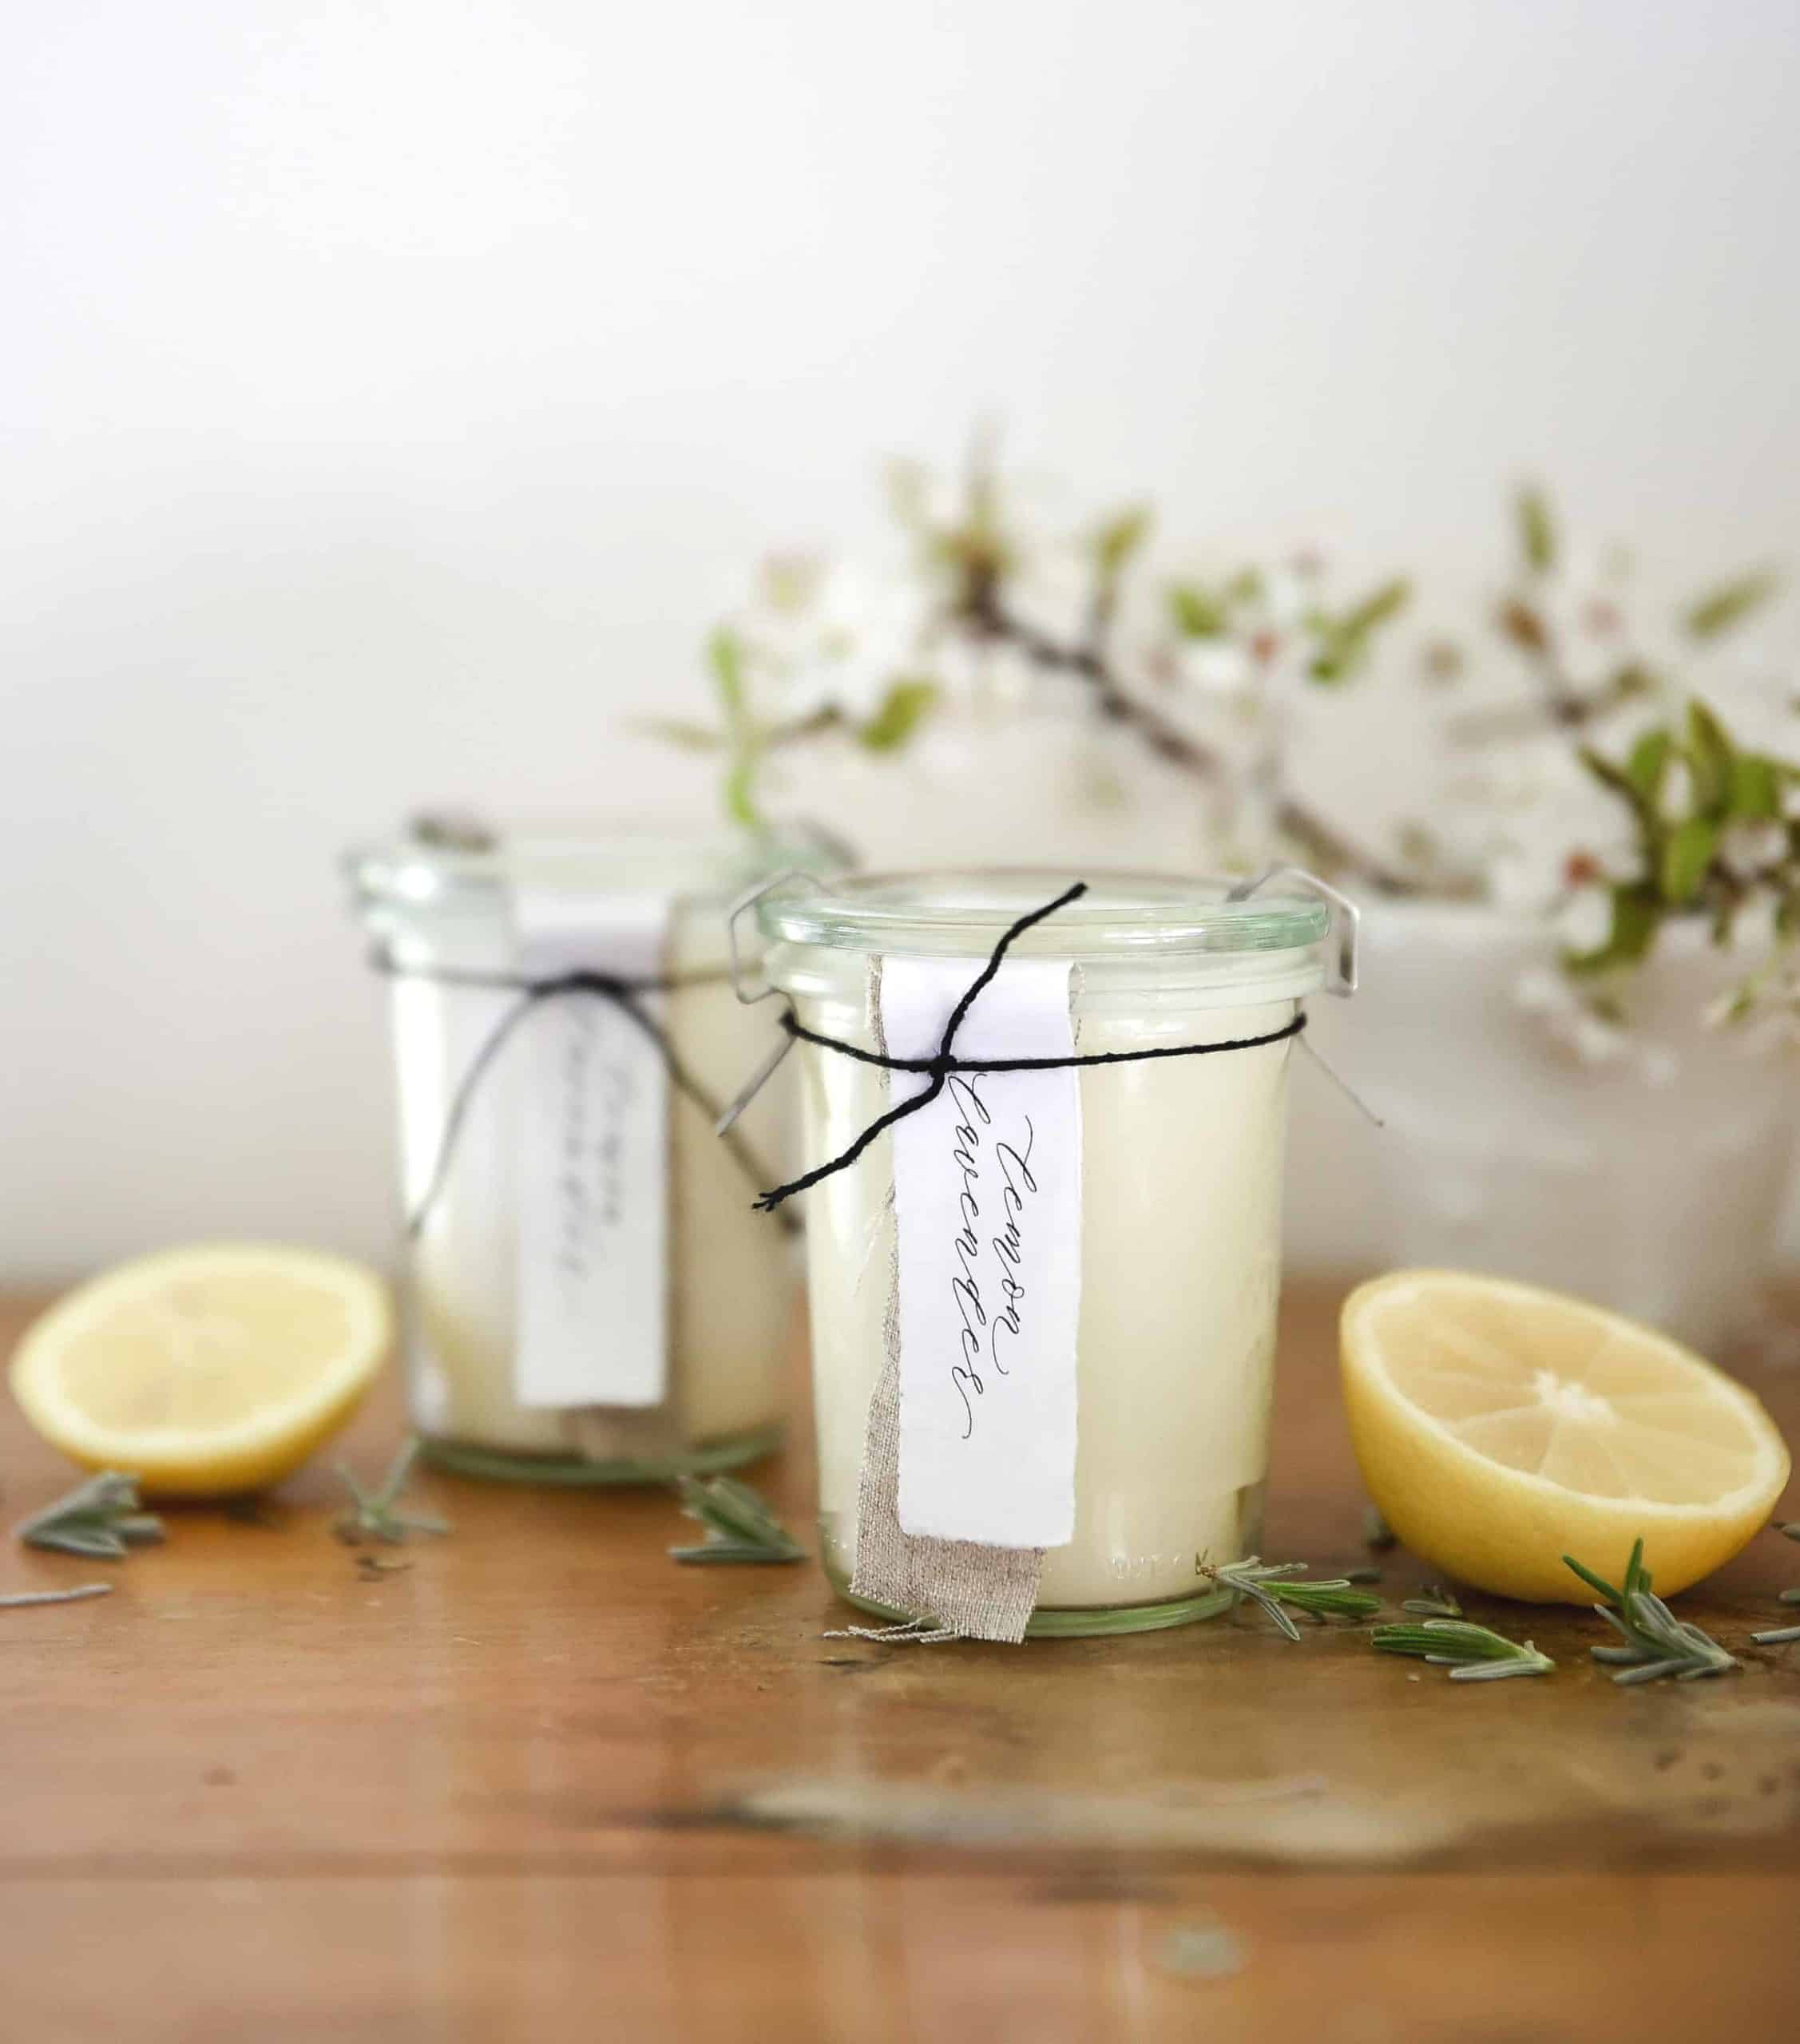 Learn how to make homemade candles with essential oils! This is a great DIY candle recipe using lavender and lemon essential oils!